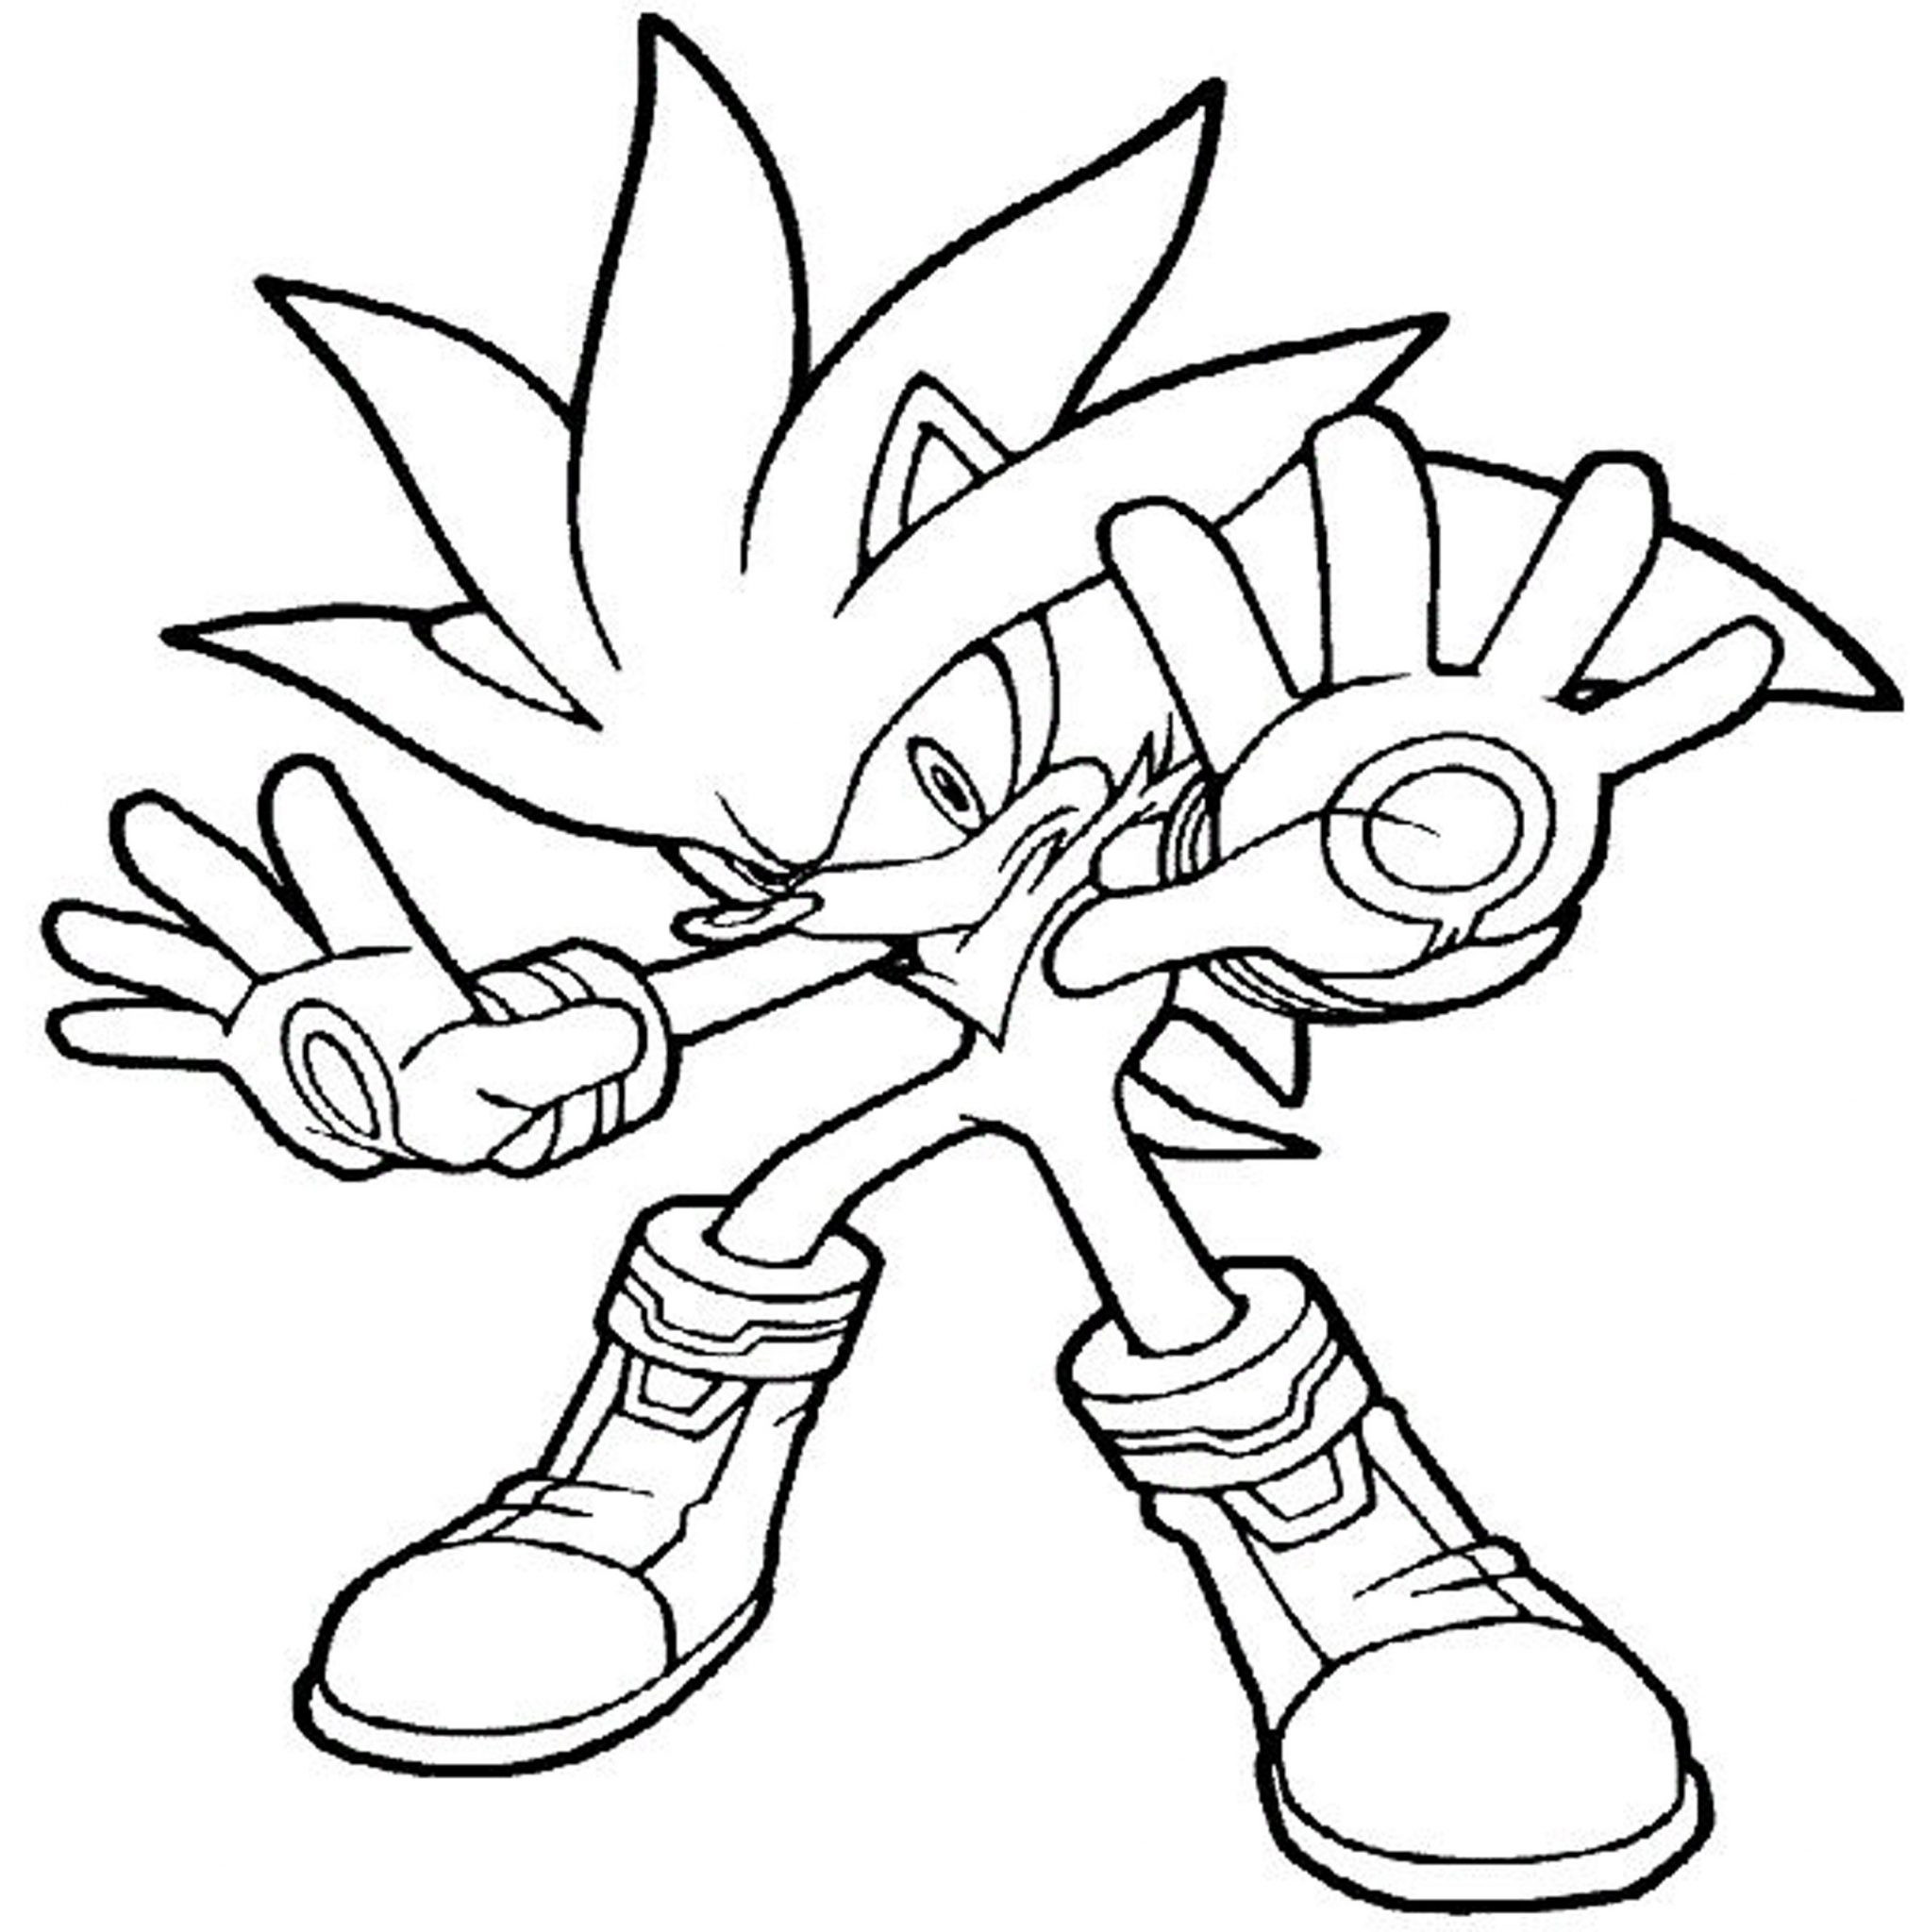 Printable Coloring Pages For Boys
 printable coloring pages for boys sonic